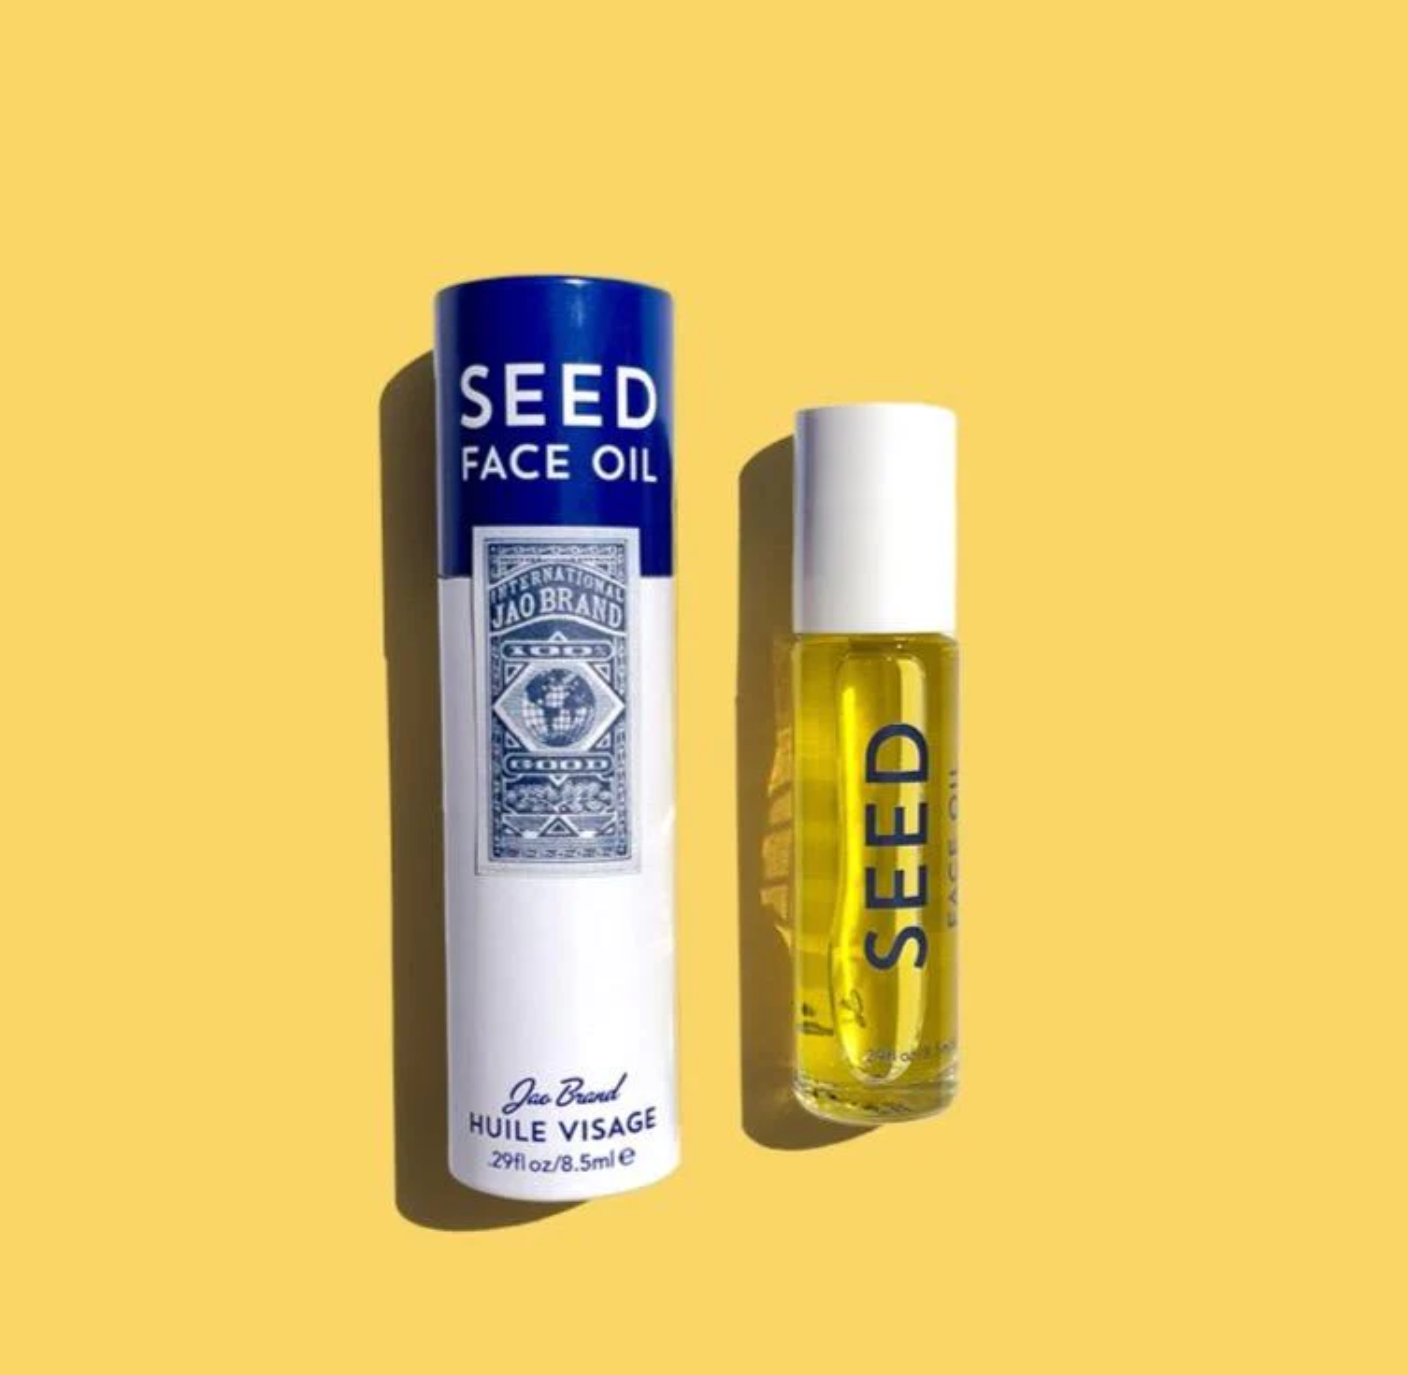 Seed Face Oil